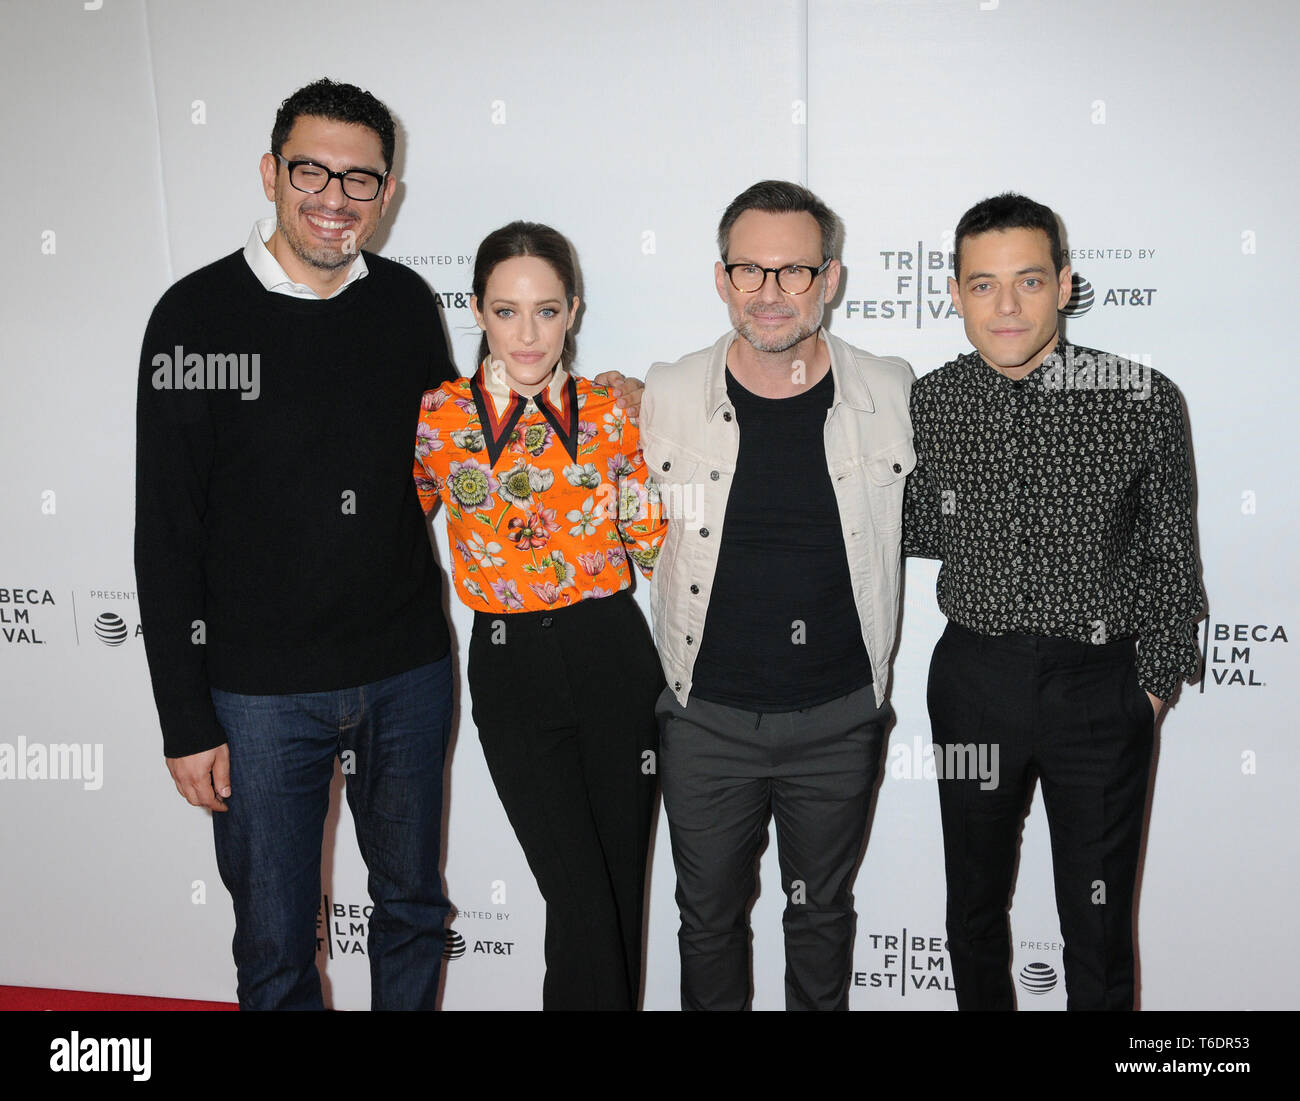 L-R: Actors Grace Gummer, Rami Malek and Carly Chaiken attend the sesaon  four premiere of USA's Mr. Robot at Village East Cinema in New York, NY on  October 1, 2019. (Photo by